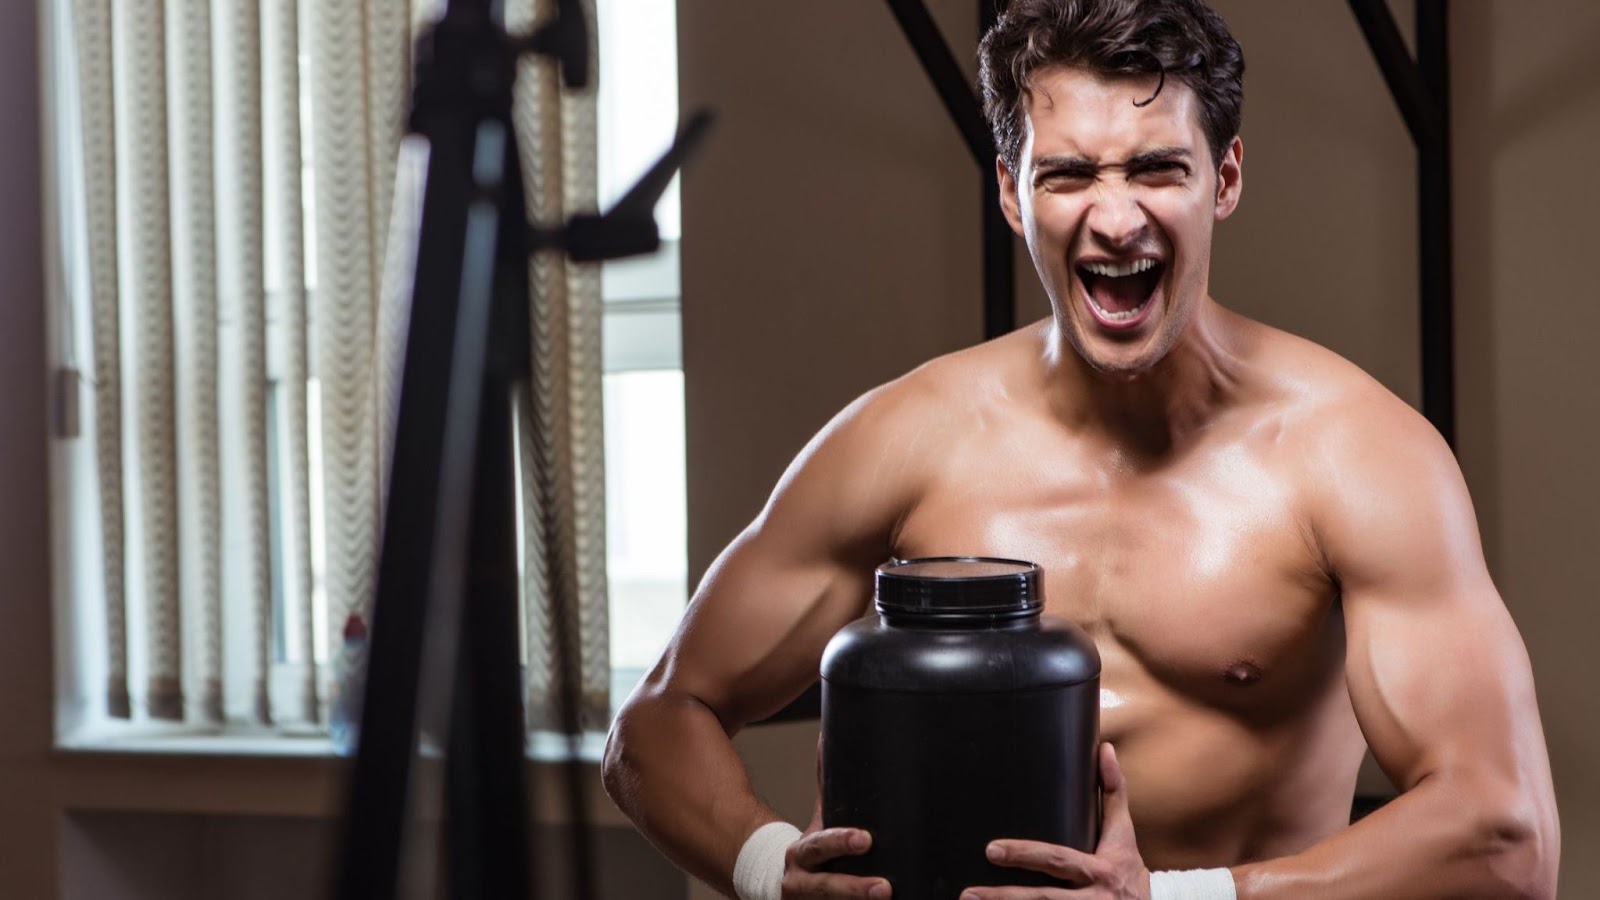 Is it a bad idea to down a pre-workout without working out?